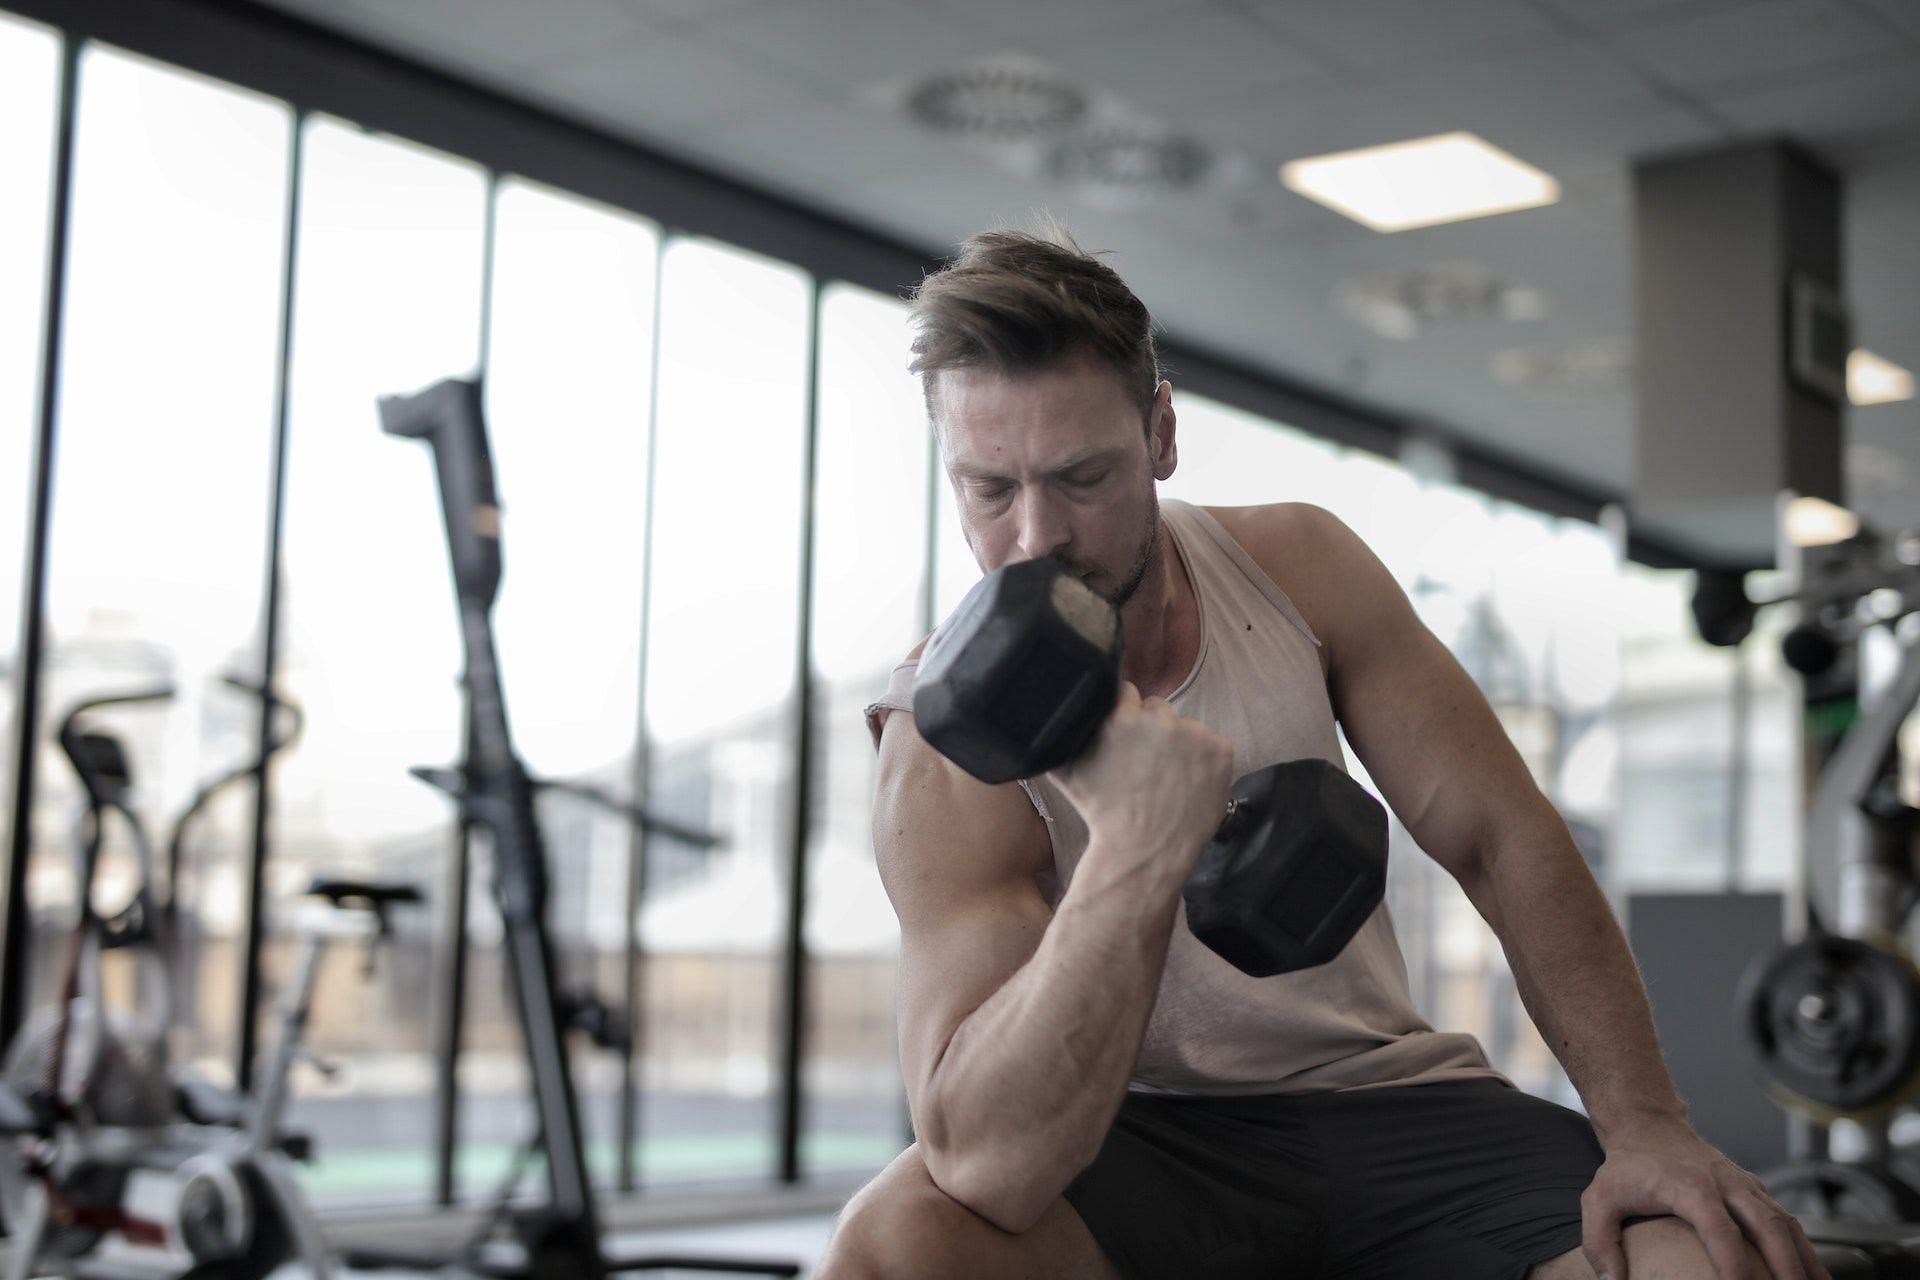 Concentration curls are the most productive short head bicep exercises that eliminate leg and upper back involvement. (Photo via Pexels/Andrea Piacquadio)